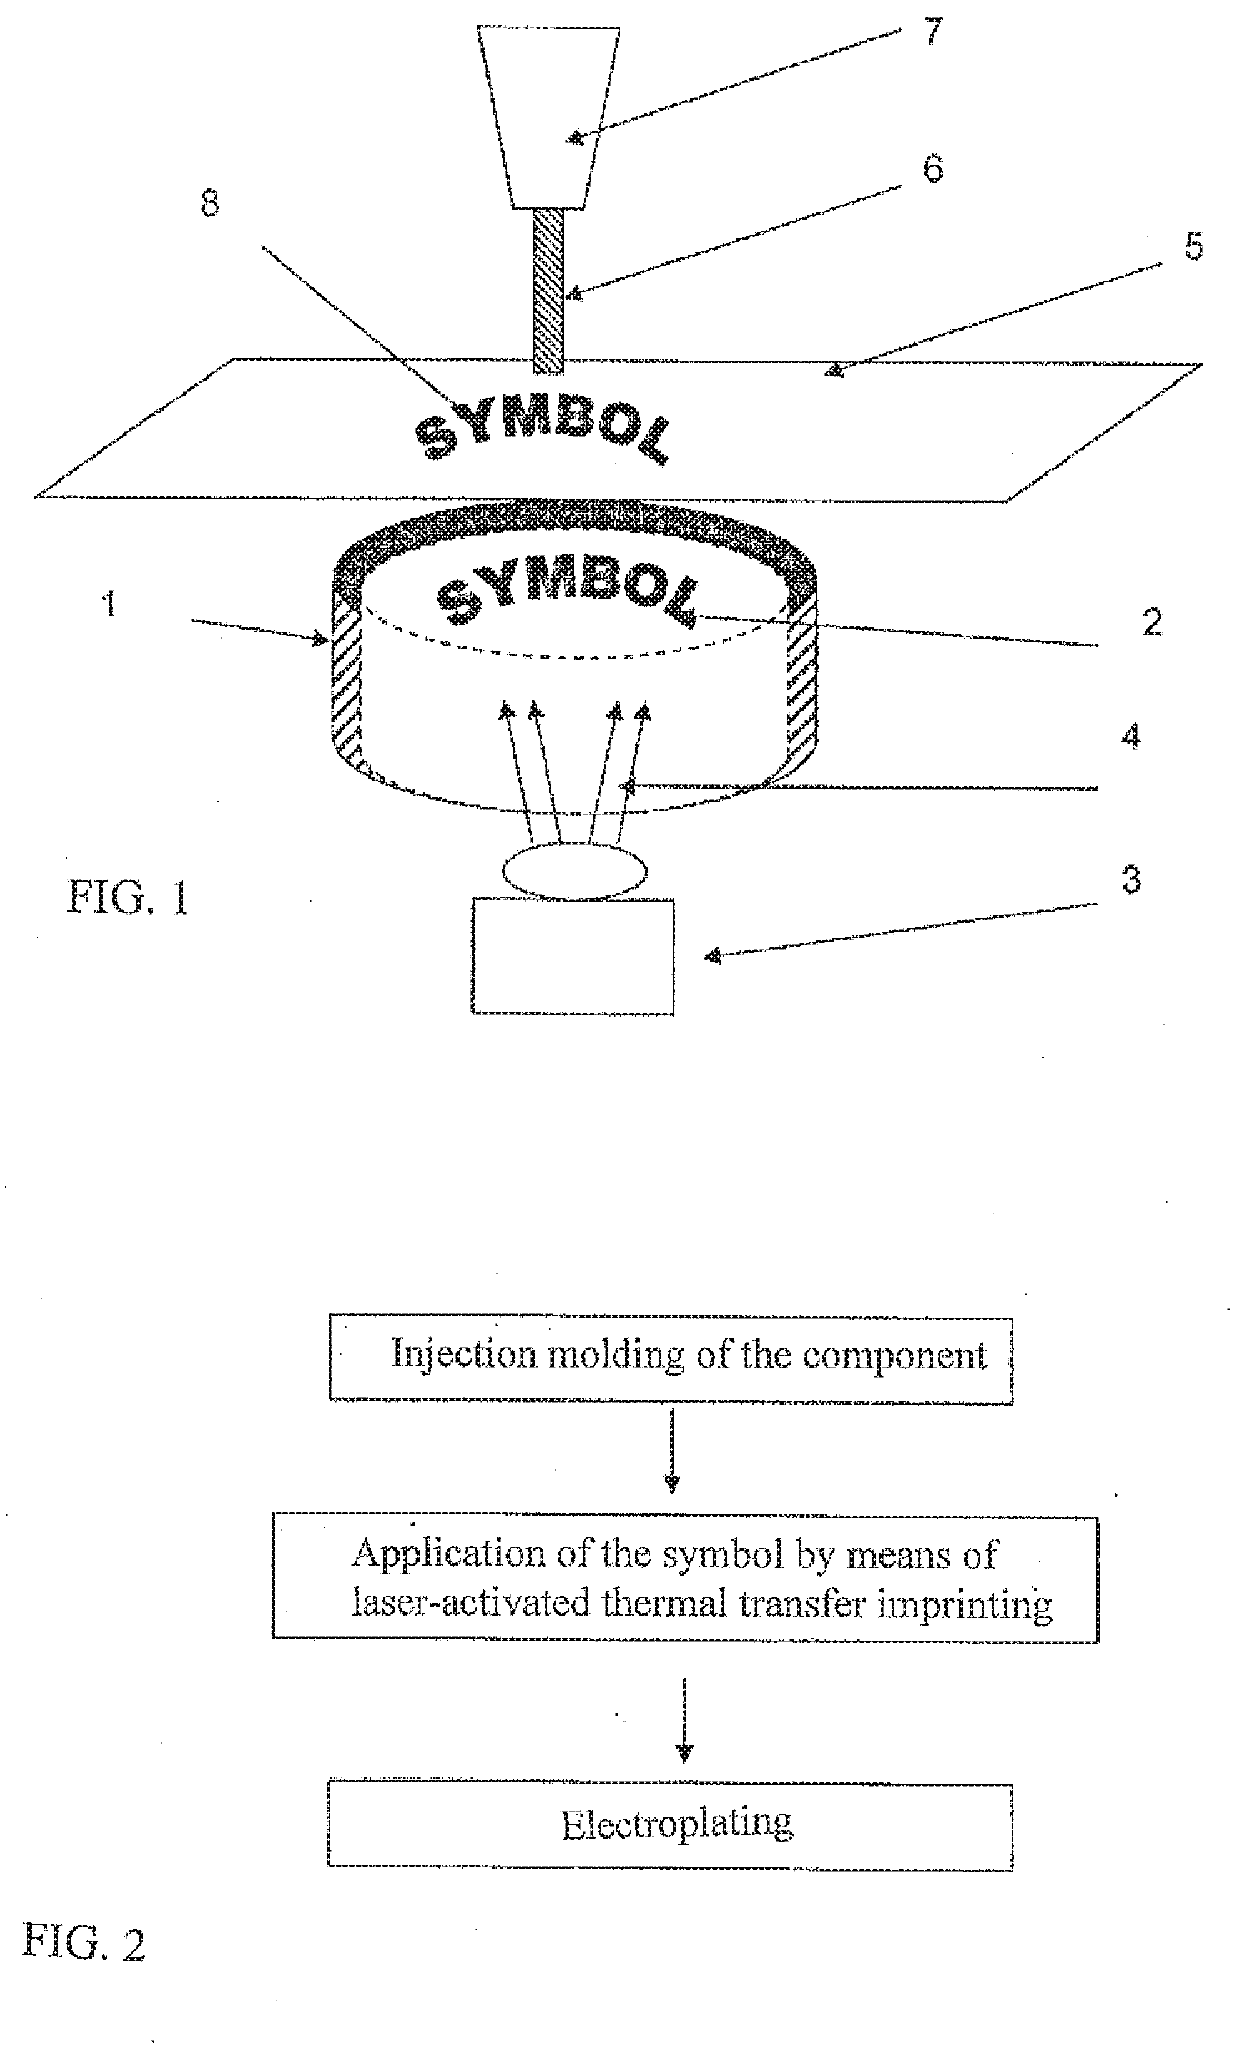 Galvanically decorated component and method for producing a galvanically decorated component